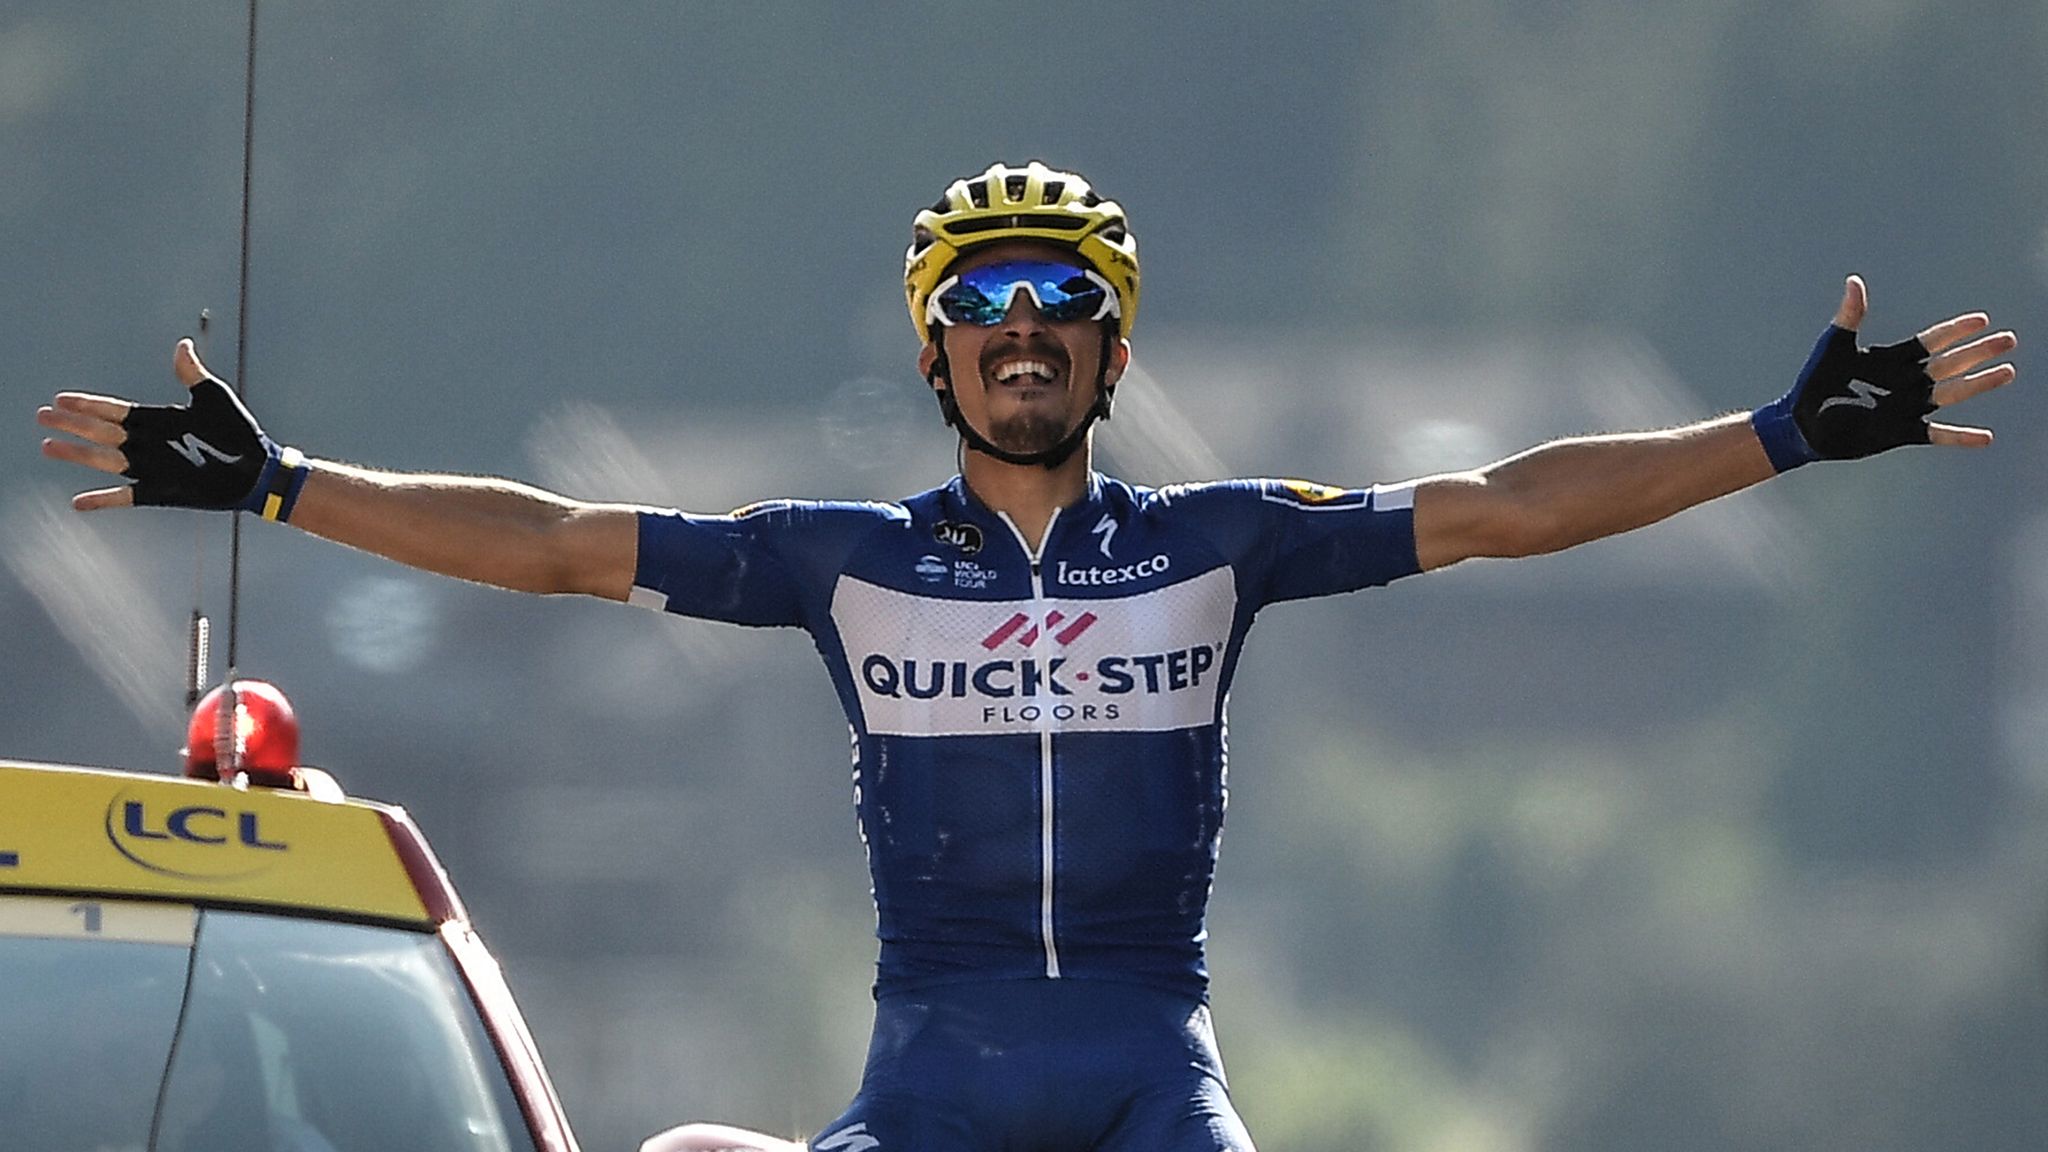 Tour de France 2021 Stage 1: Alaphilippe gets the yellow jersey!